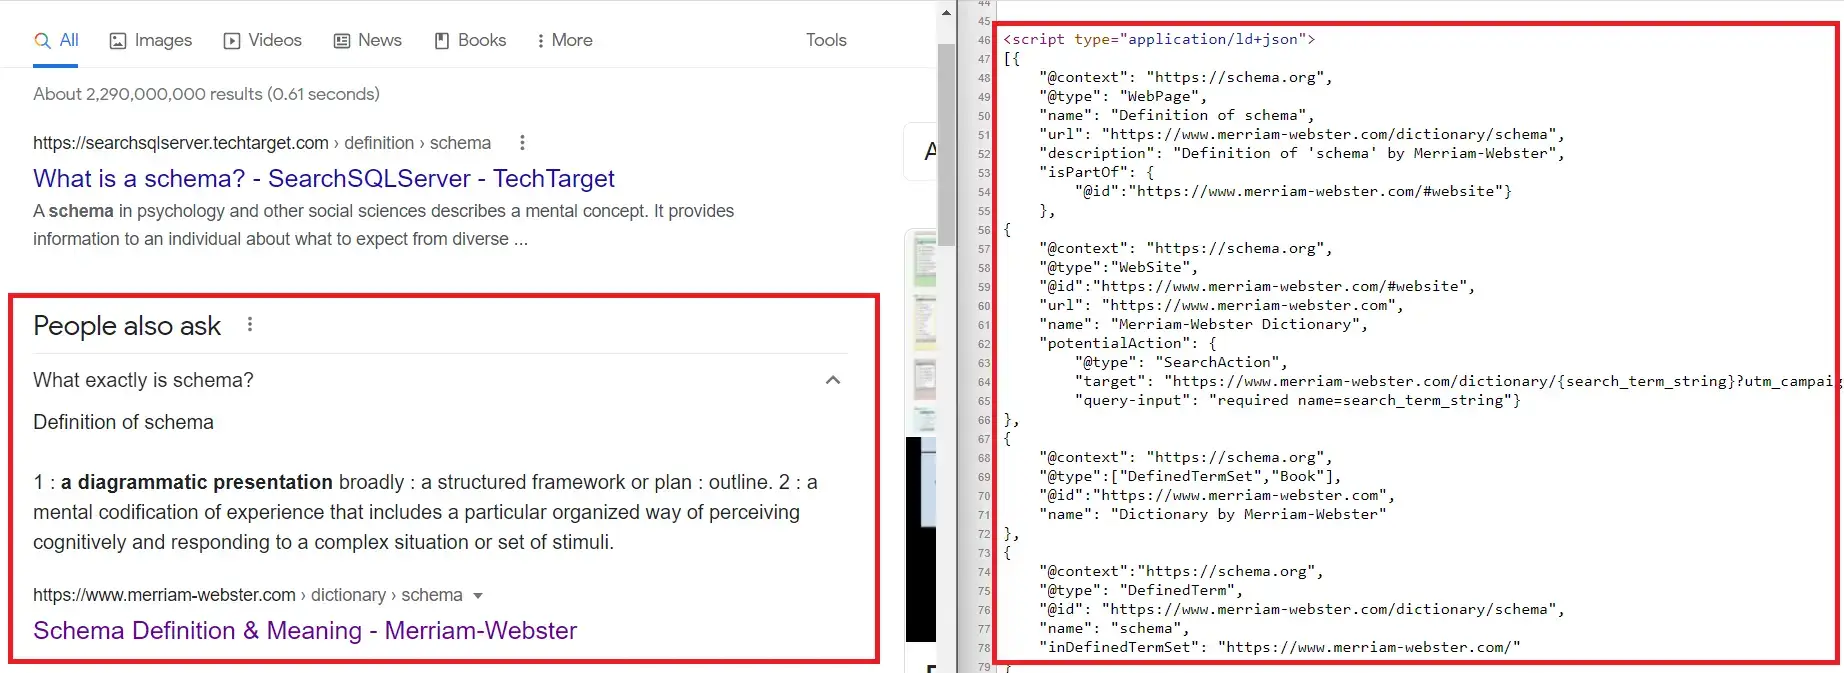 An example showing a featured snippet on the right and related SCHEMA markup code on the right for the search query SCHEMA markup.